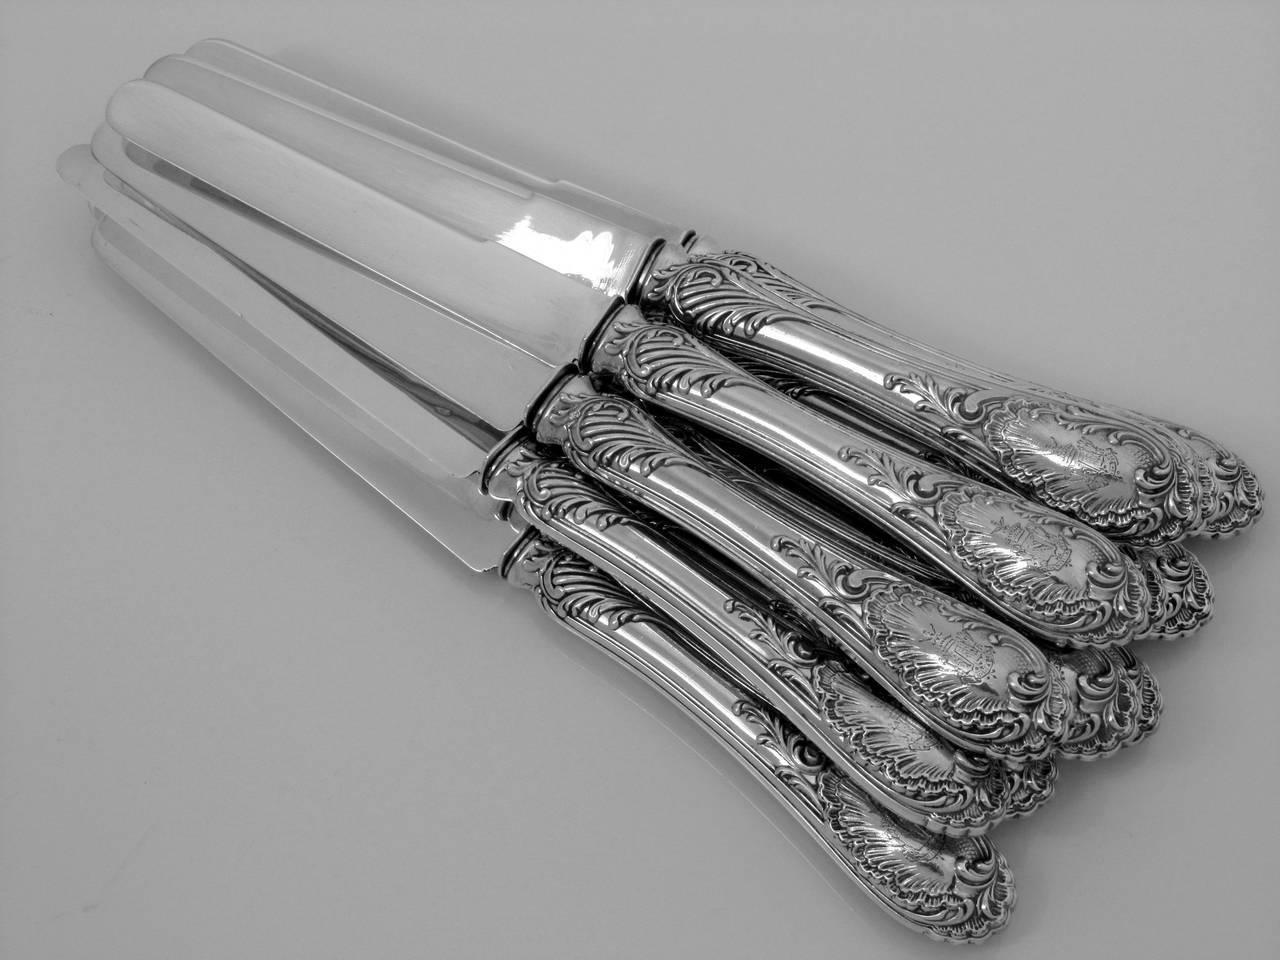 Late 19th Century Puiforcat French All Sterling Silver Dessert Entremet Knife Set 12 Piece Rococo